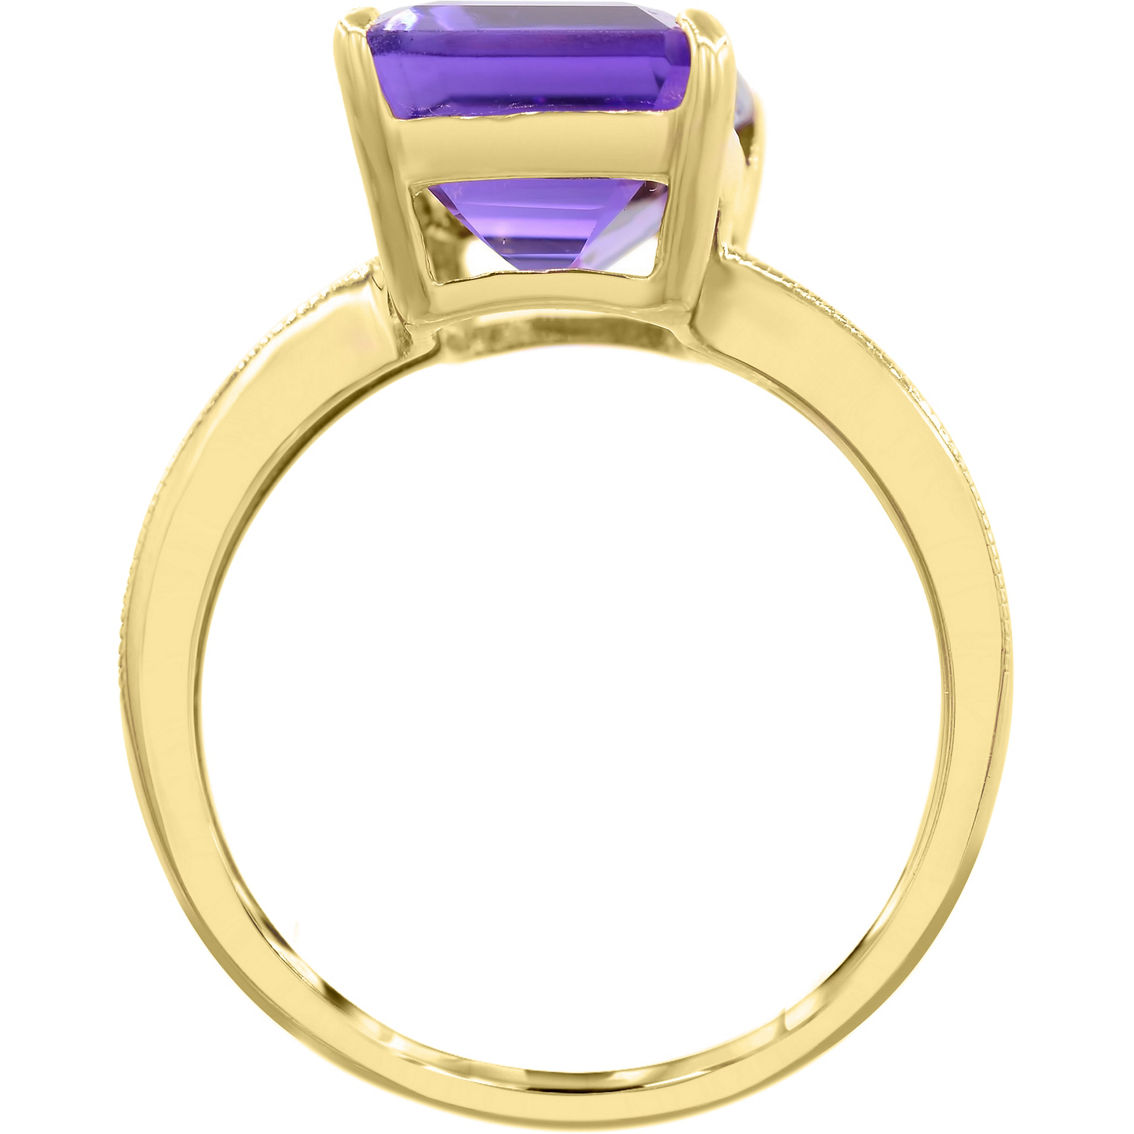 10K Yellow Gold Emerald Cut Amethyst Solitaire Ring Size 7 - Image 2 of 3